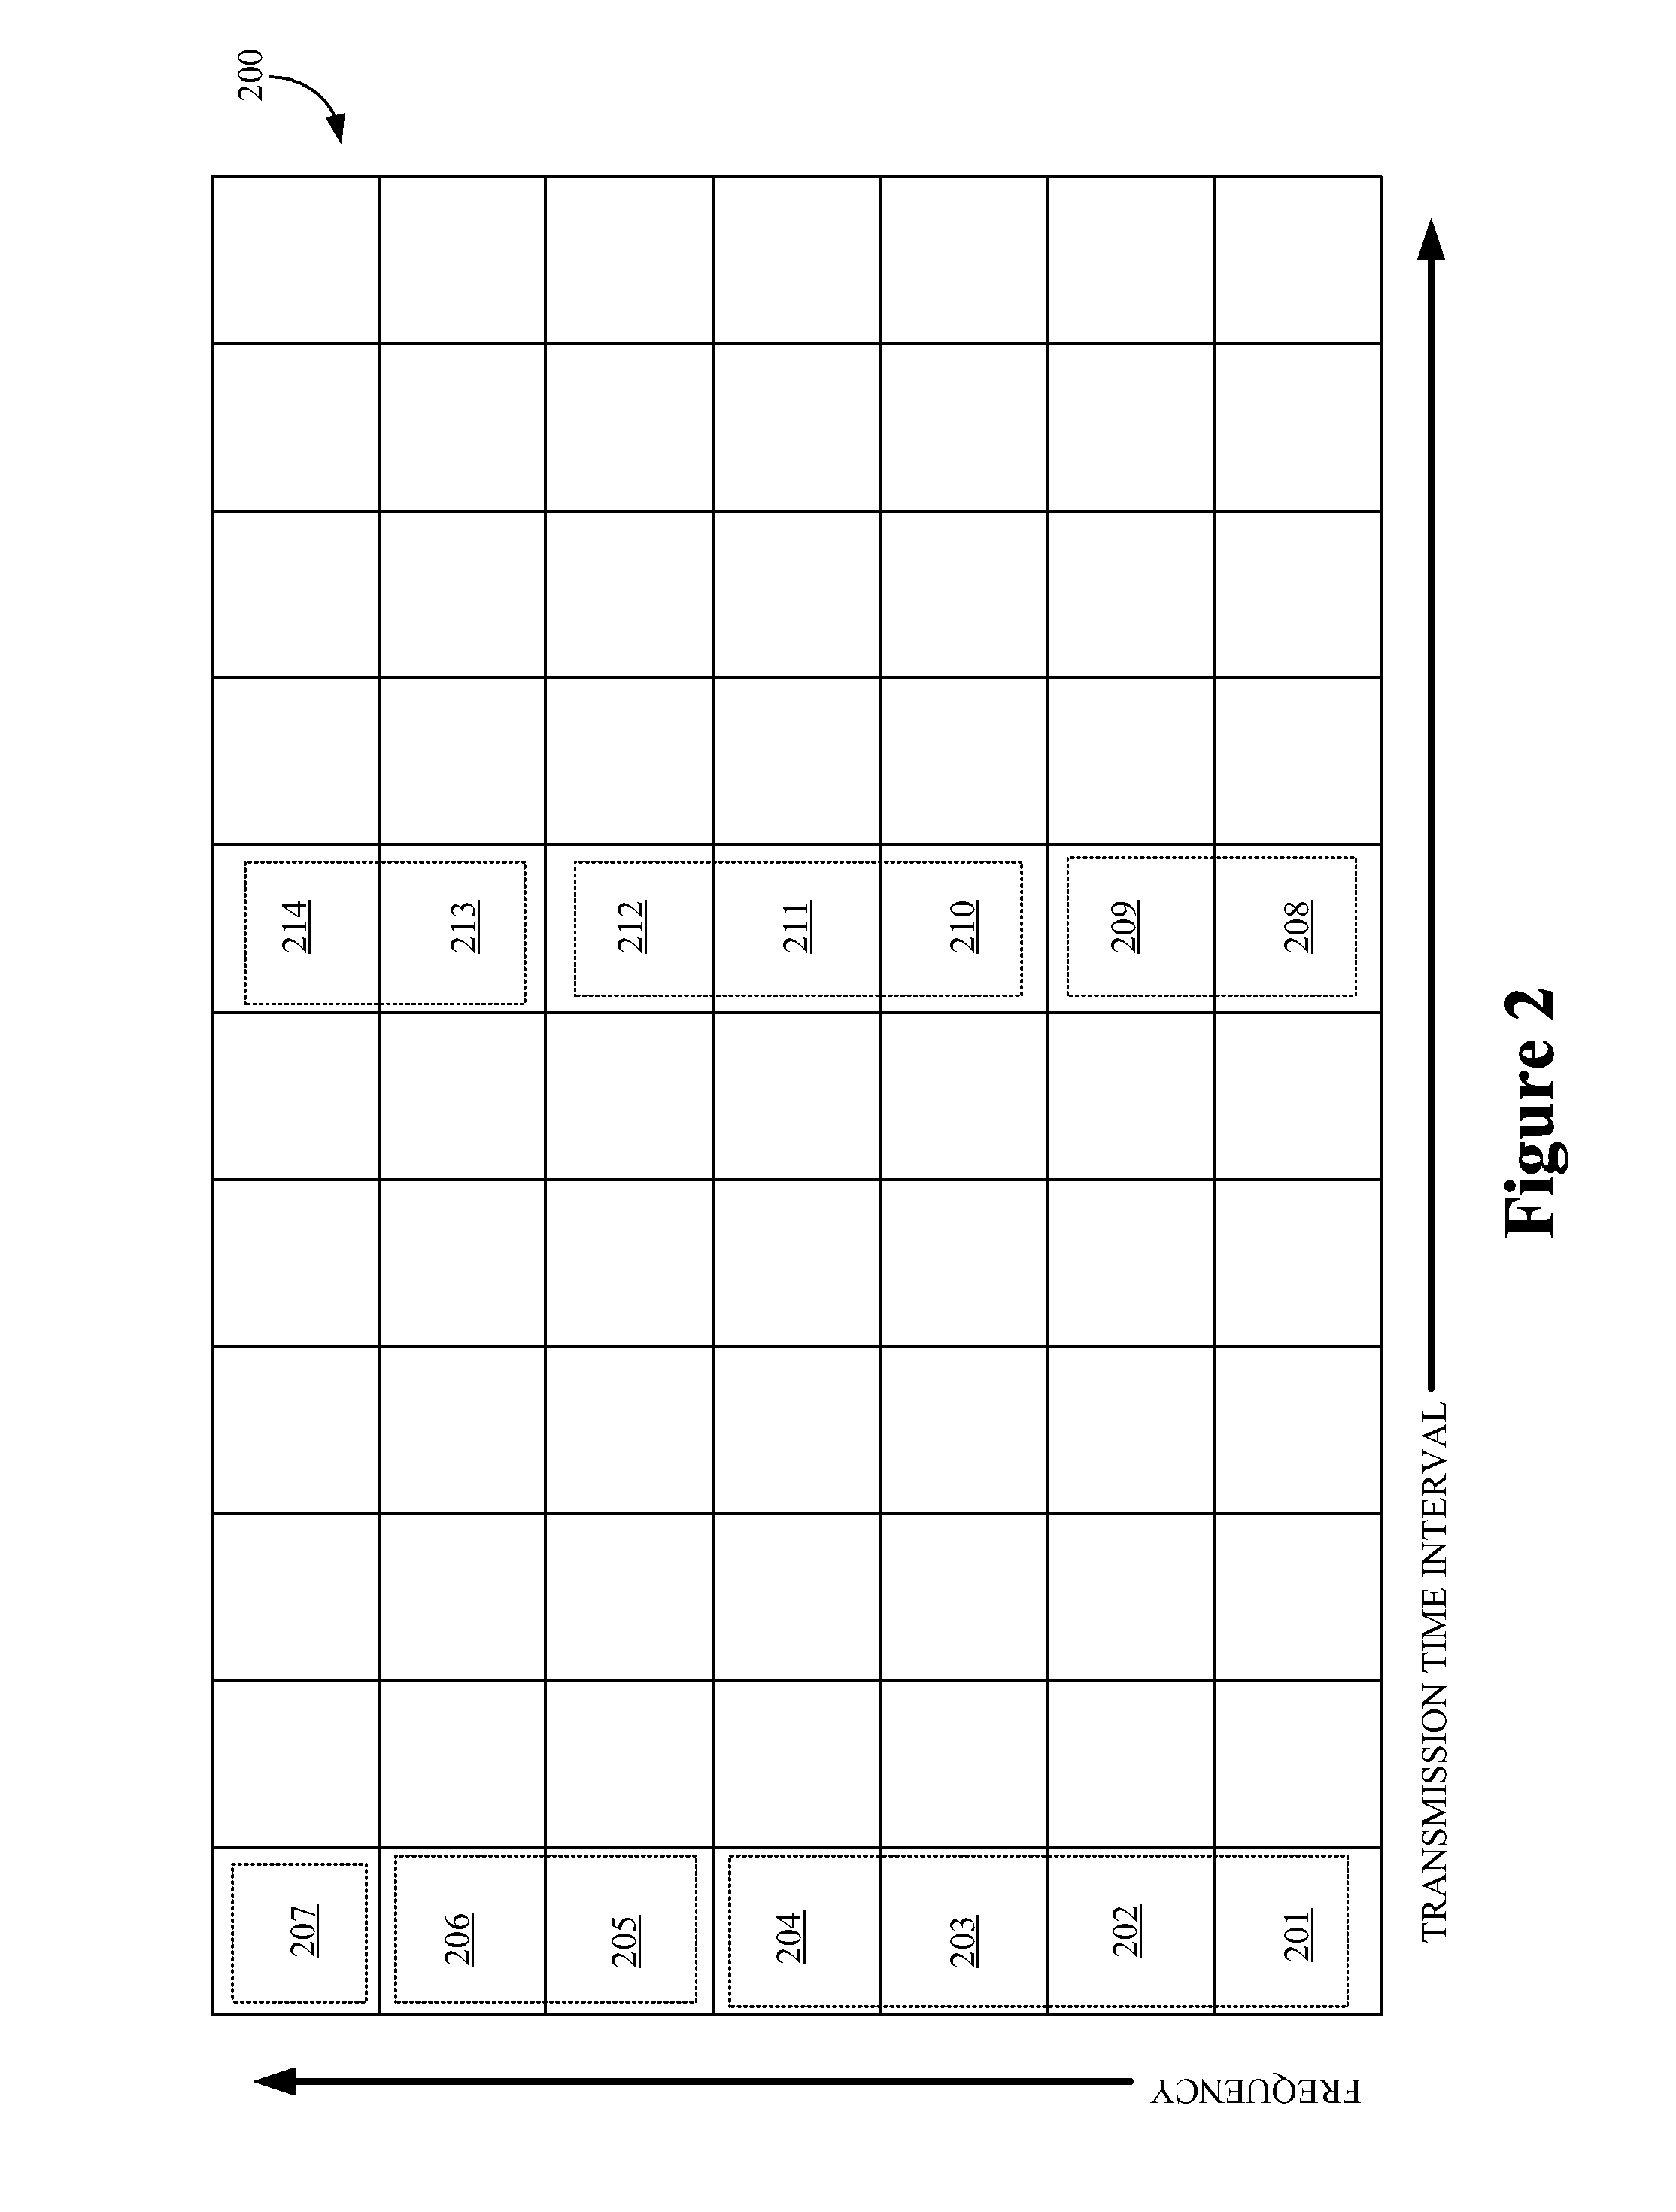 Method of assigning uplink acknowledgement channels in scheduled packet data systems